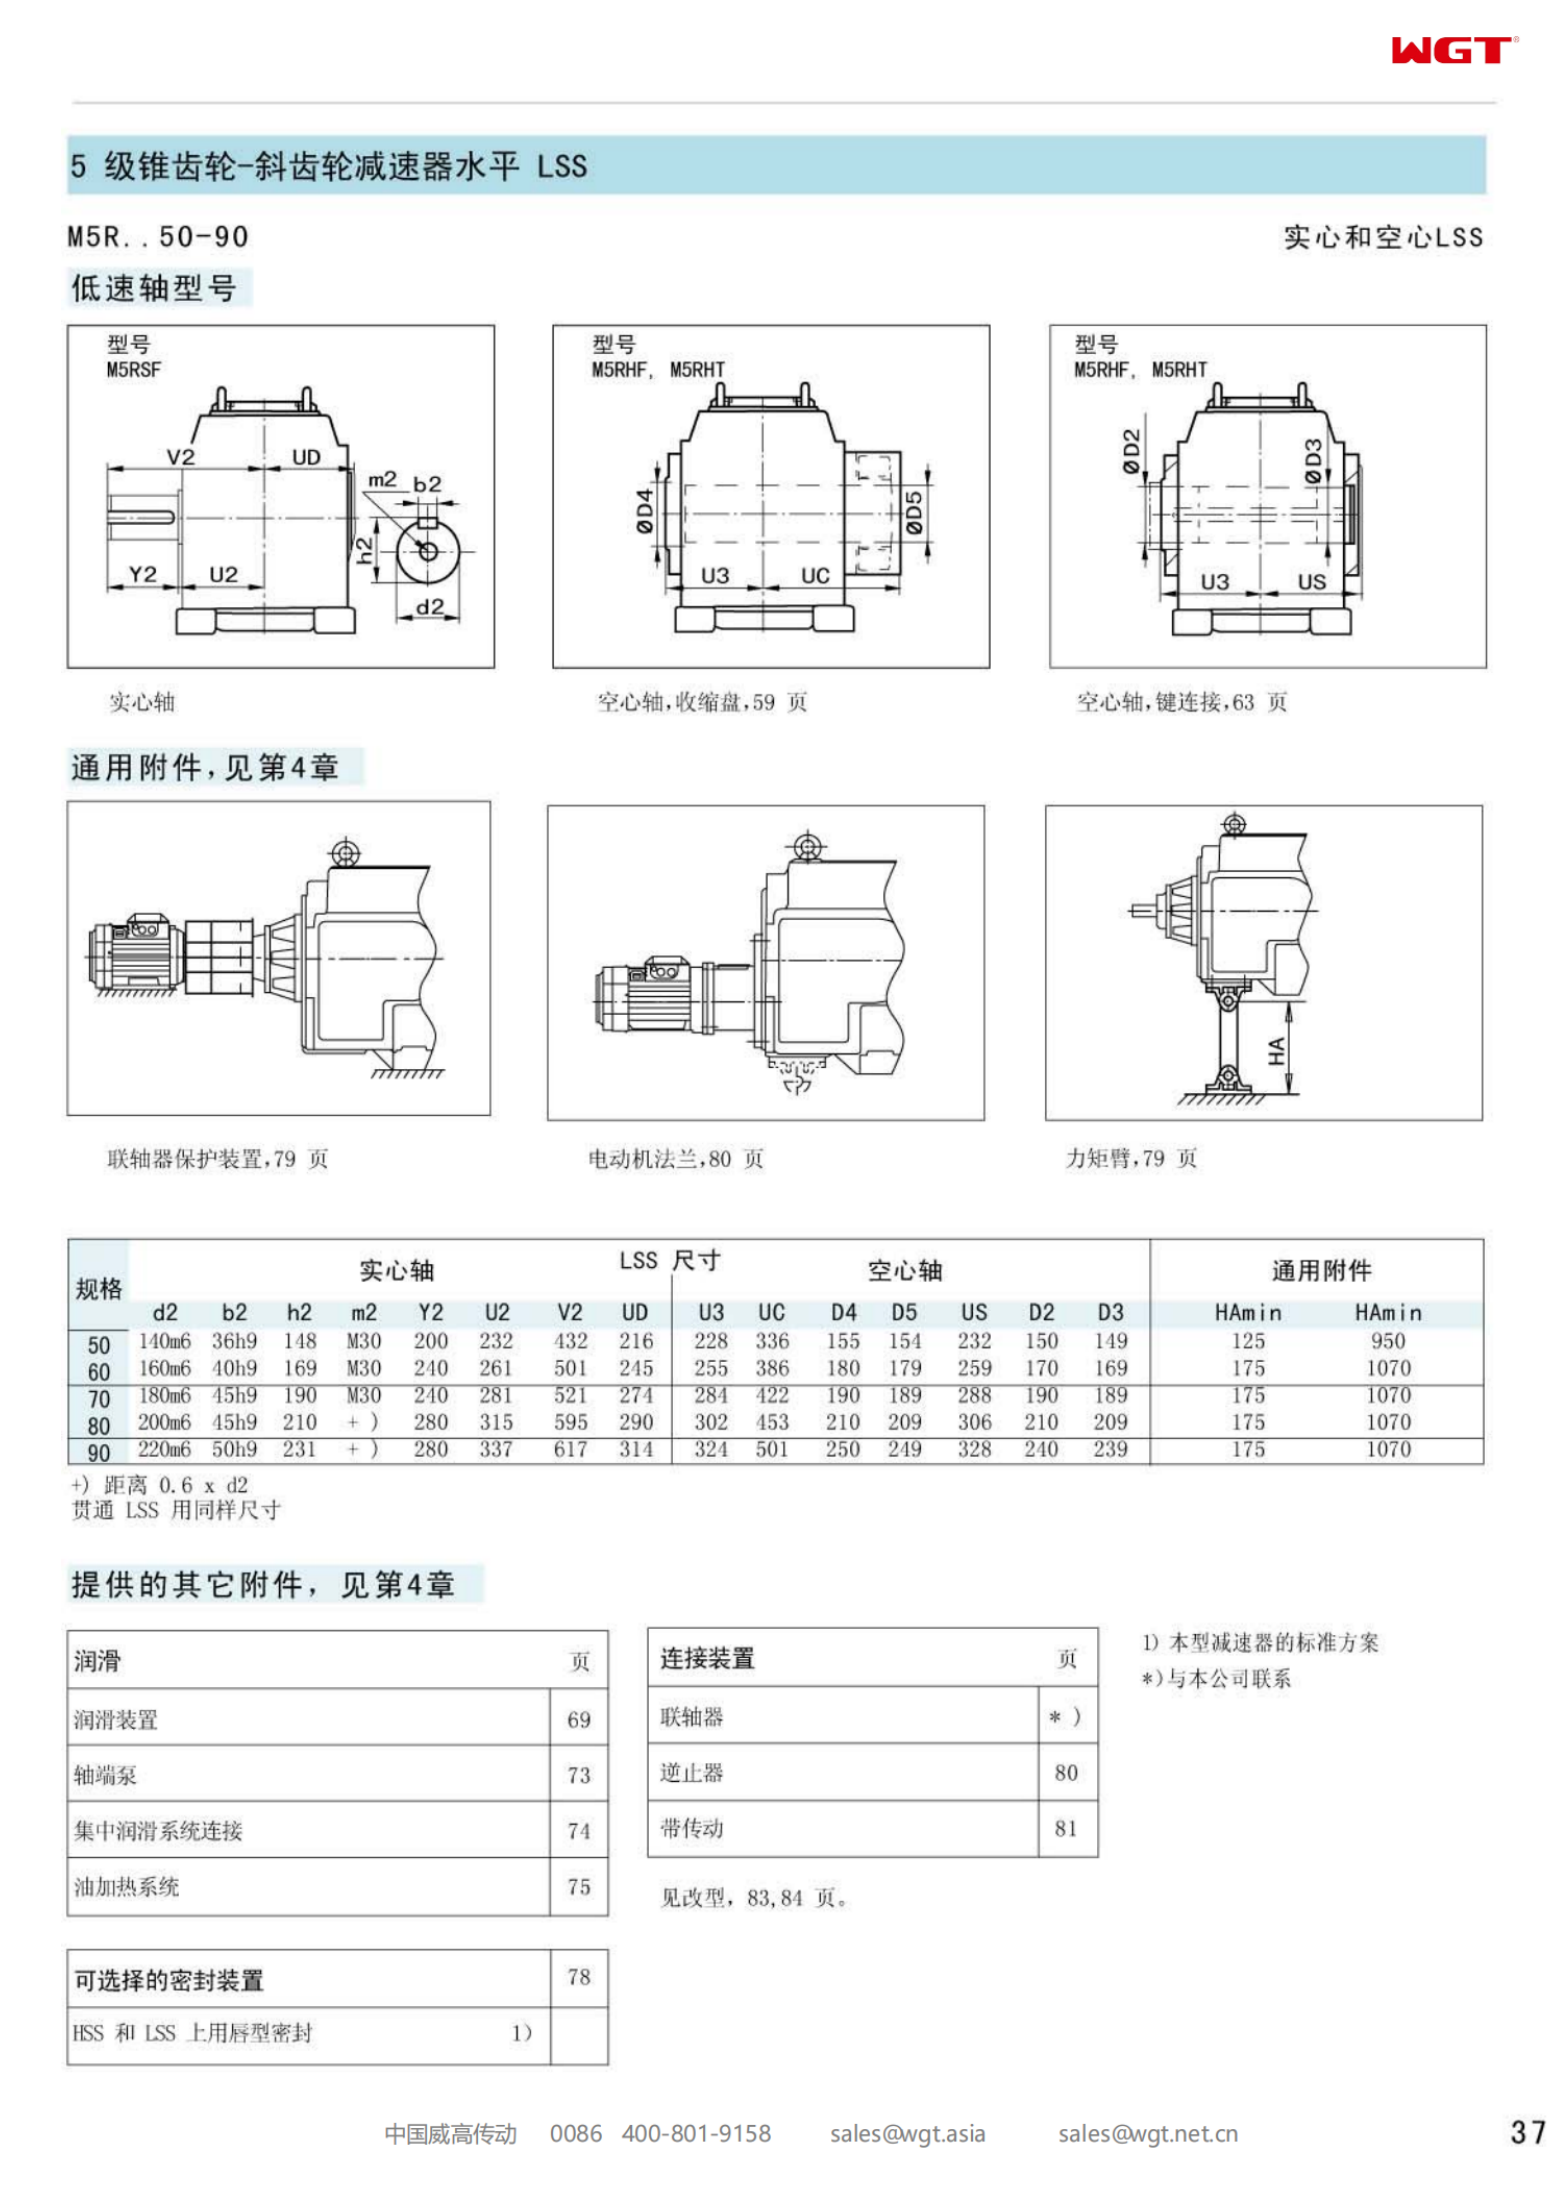 M2PVSF10 Replace_SEW_M_Series Gearbox